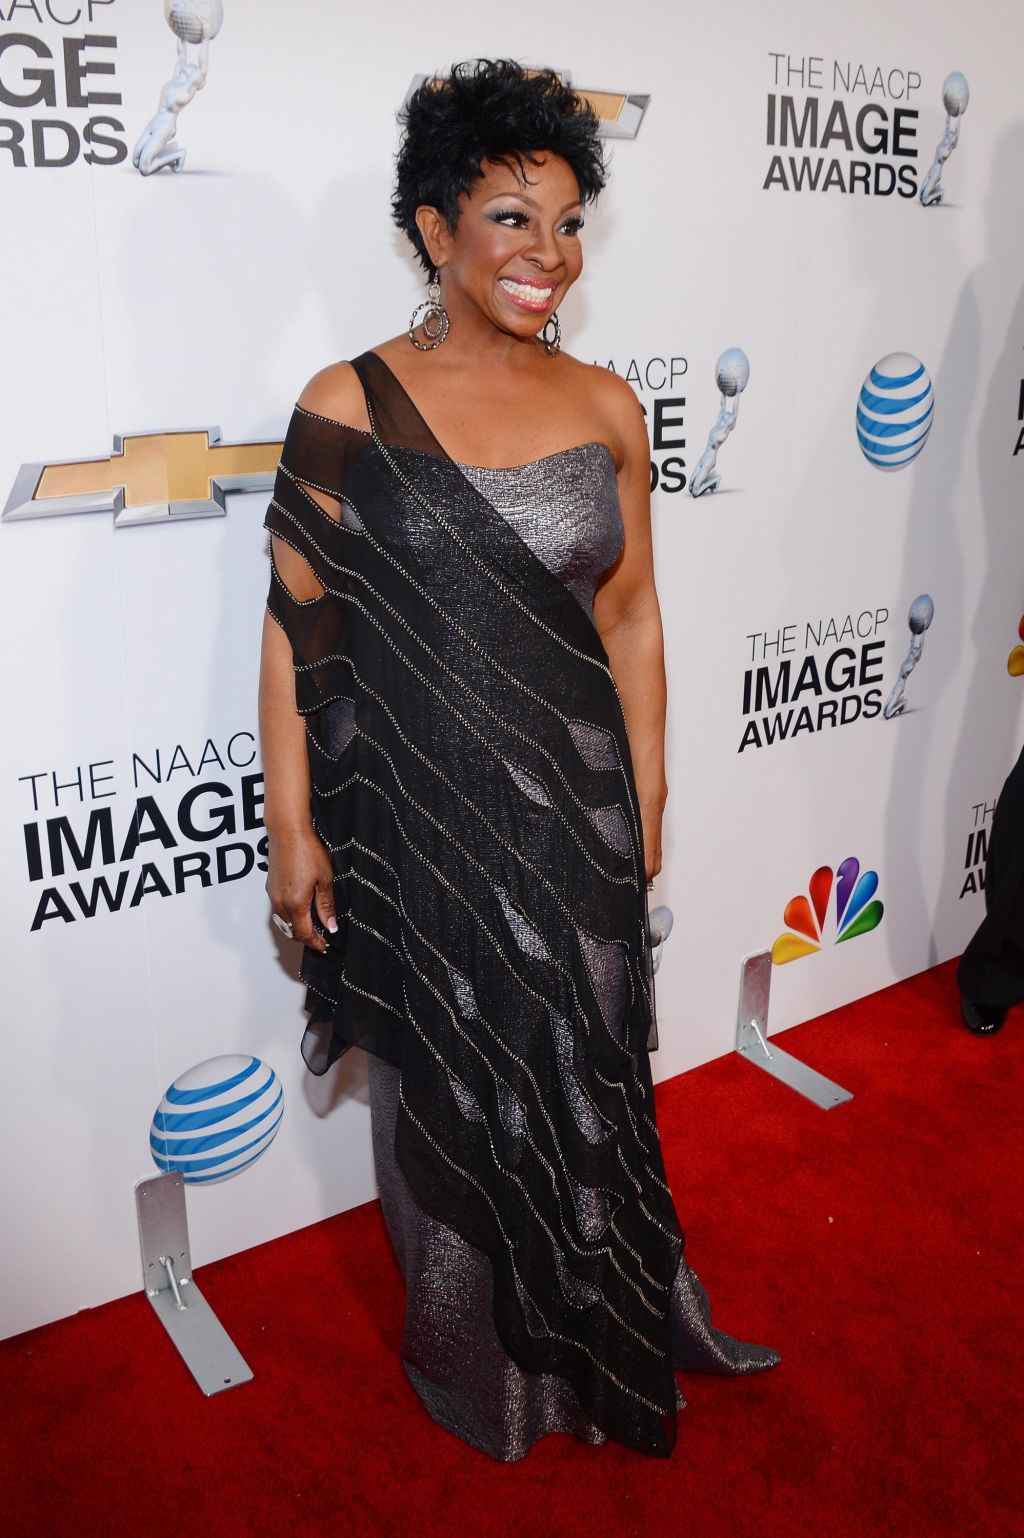 44th NAACP Image Awards - Red Carpet